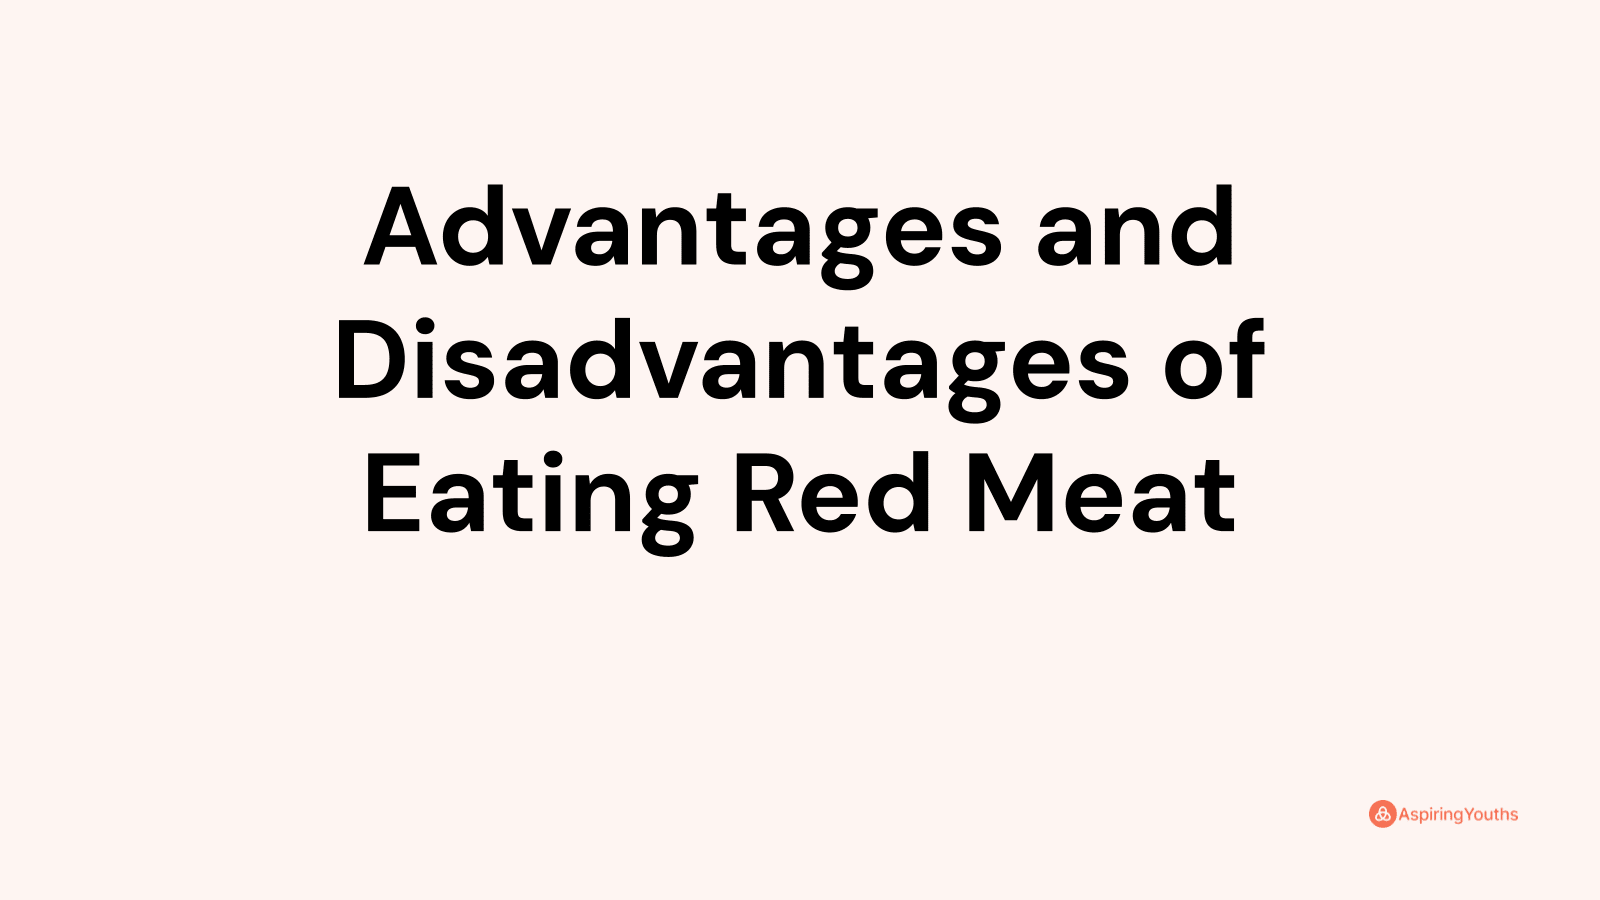 Advantages and disadvantages of Eating Red Meat